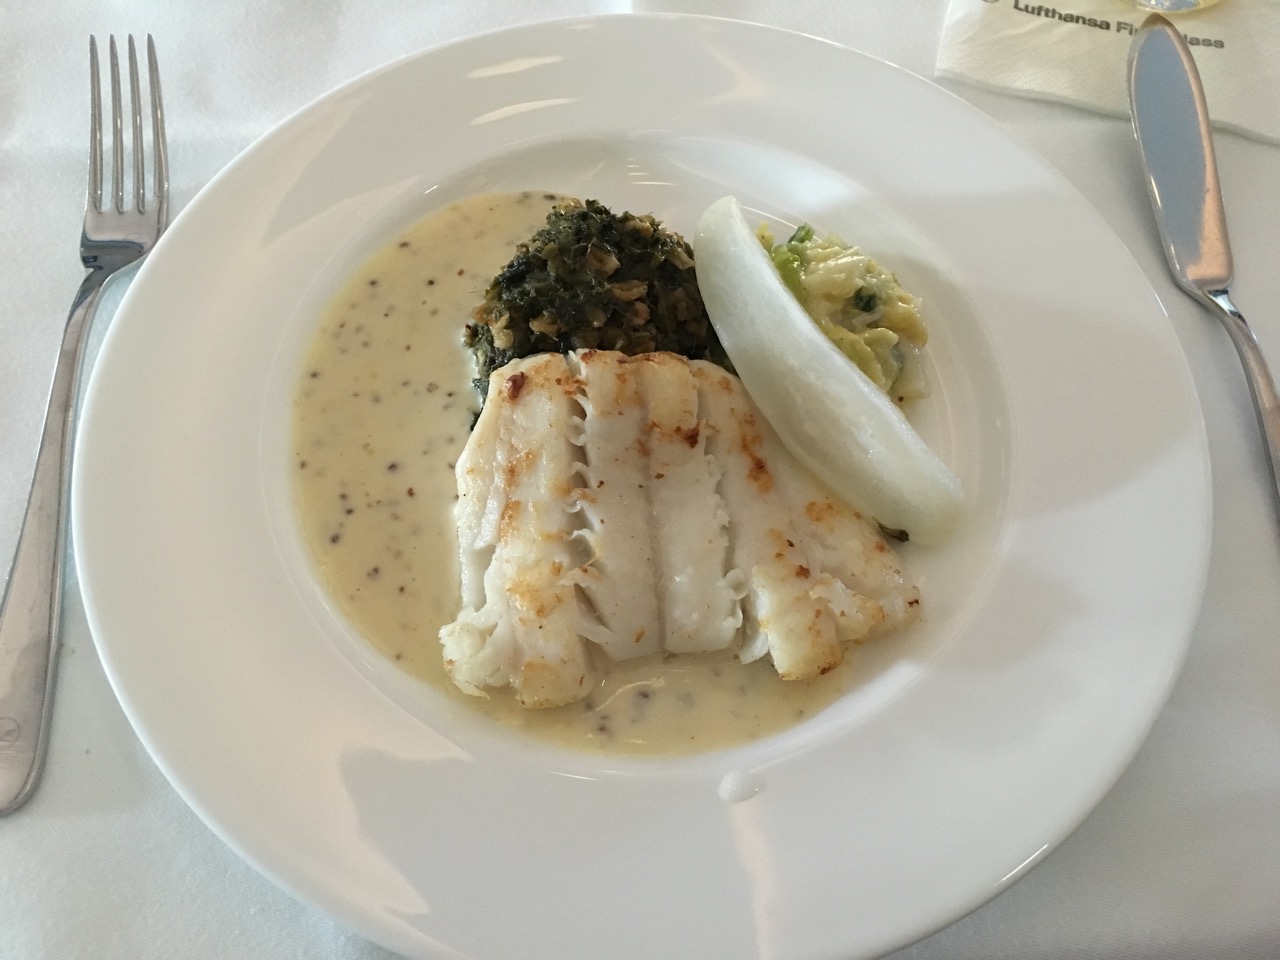 Fried Halibut with Mustard Sauce, Kale and Savoy Cabbage